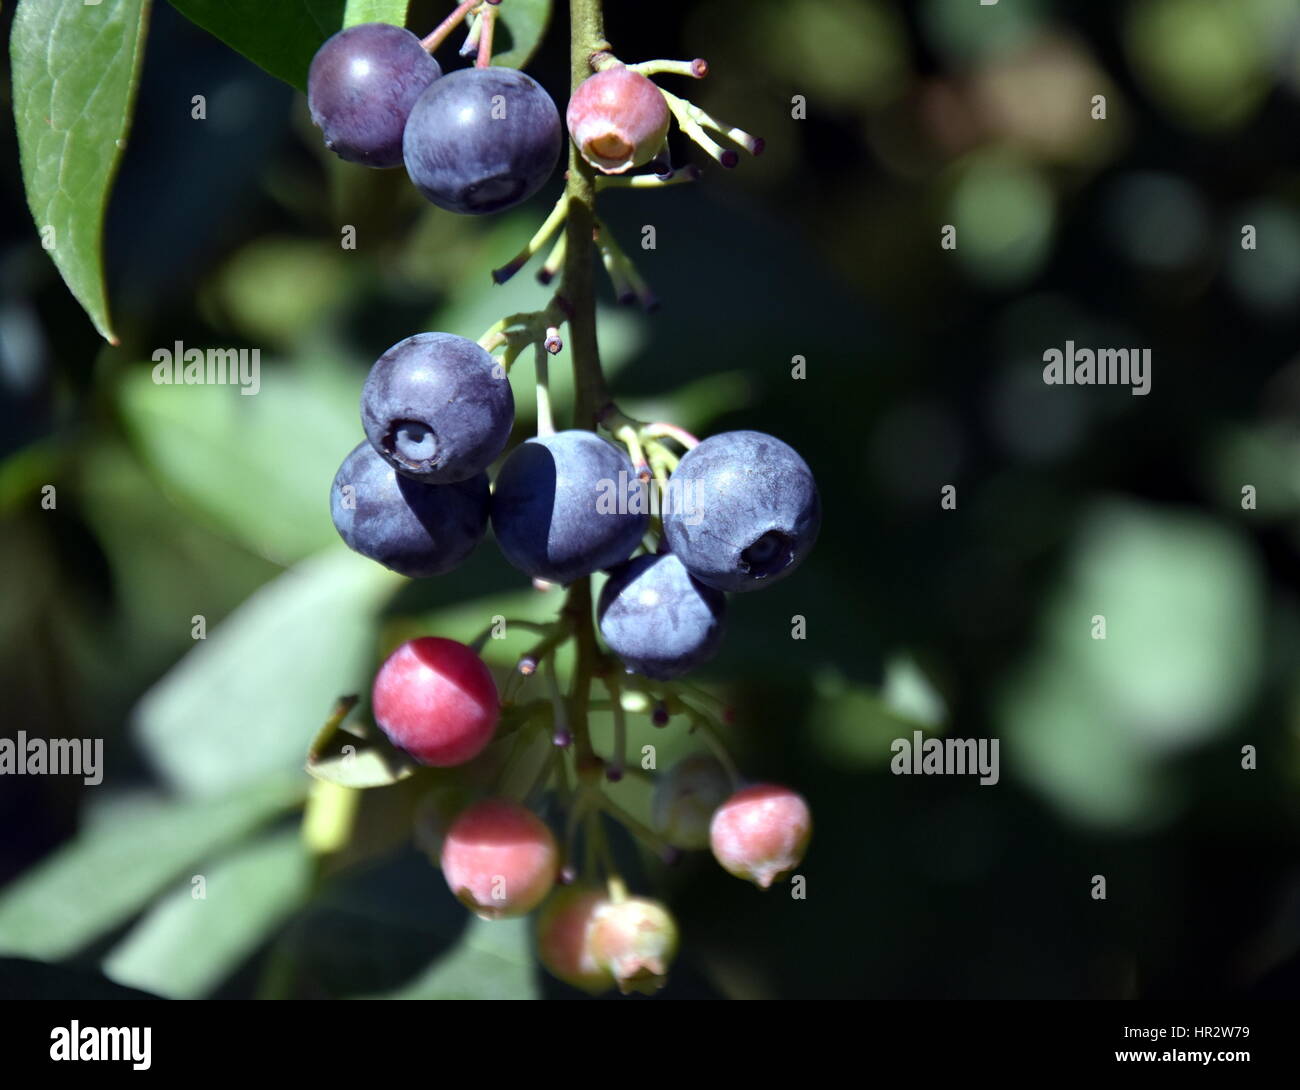 Fresh Blueberries or Bilberries. Blueberry twig blueberry bush in a garden. Stock Photo